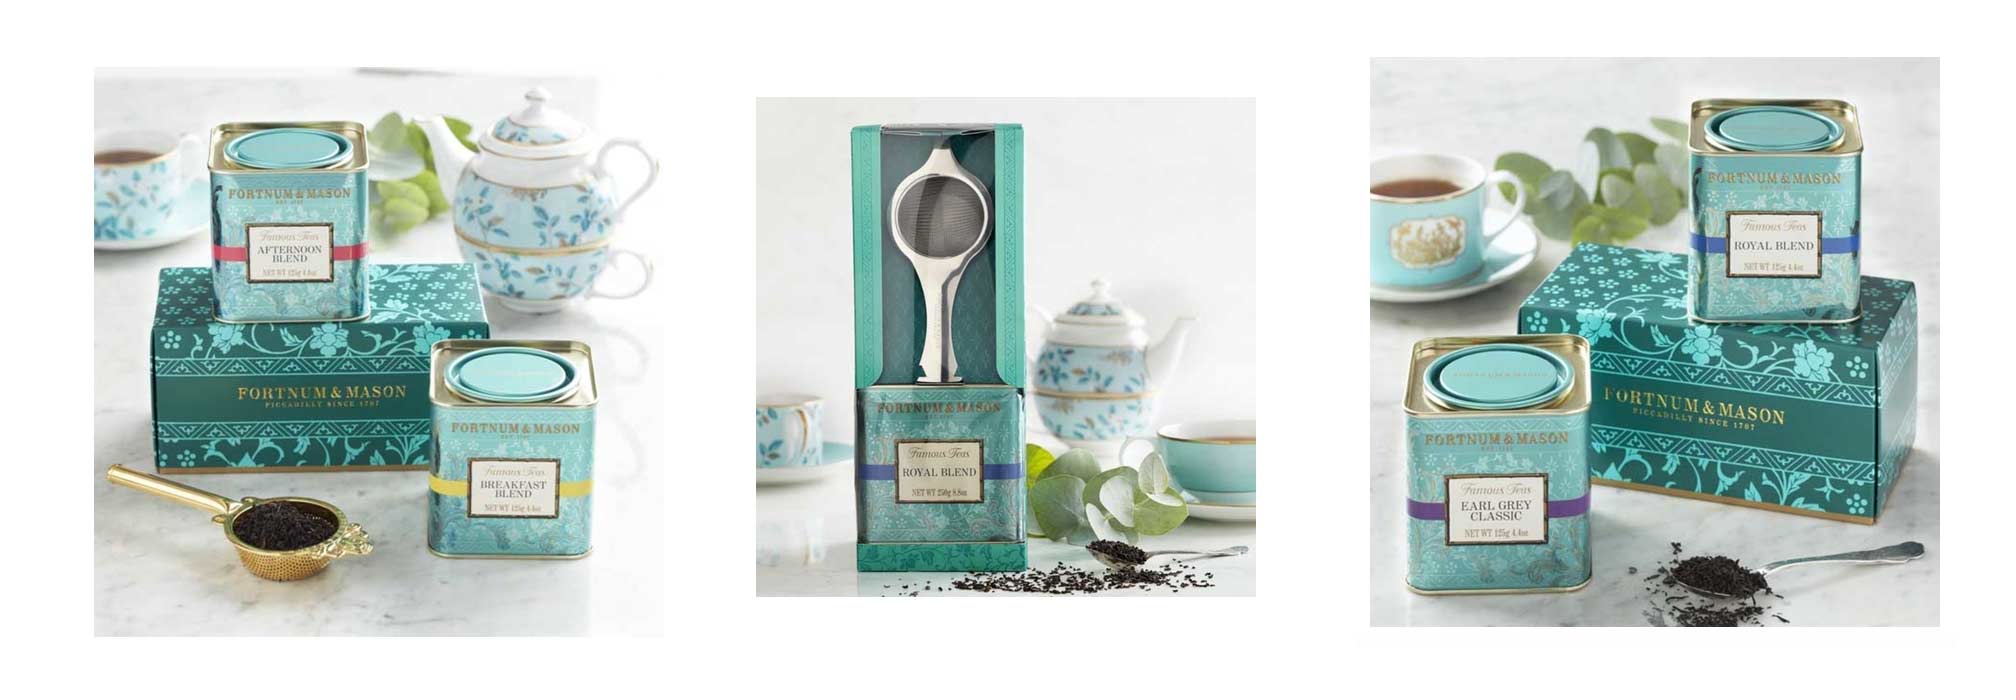 three images of Fortnum & Mason teas and their teaware